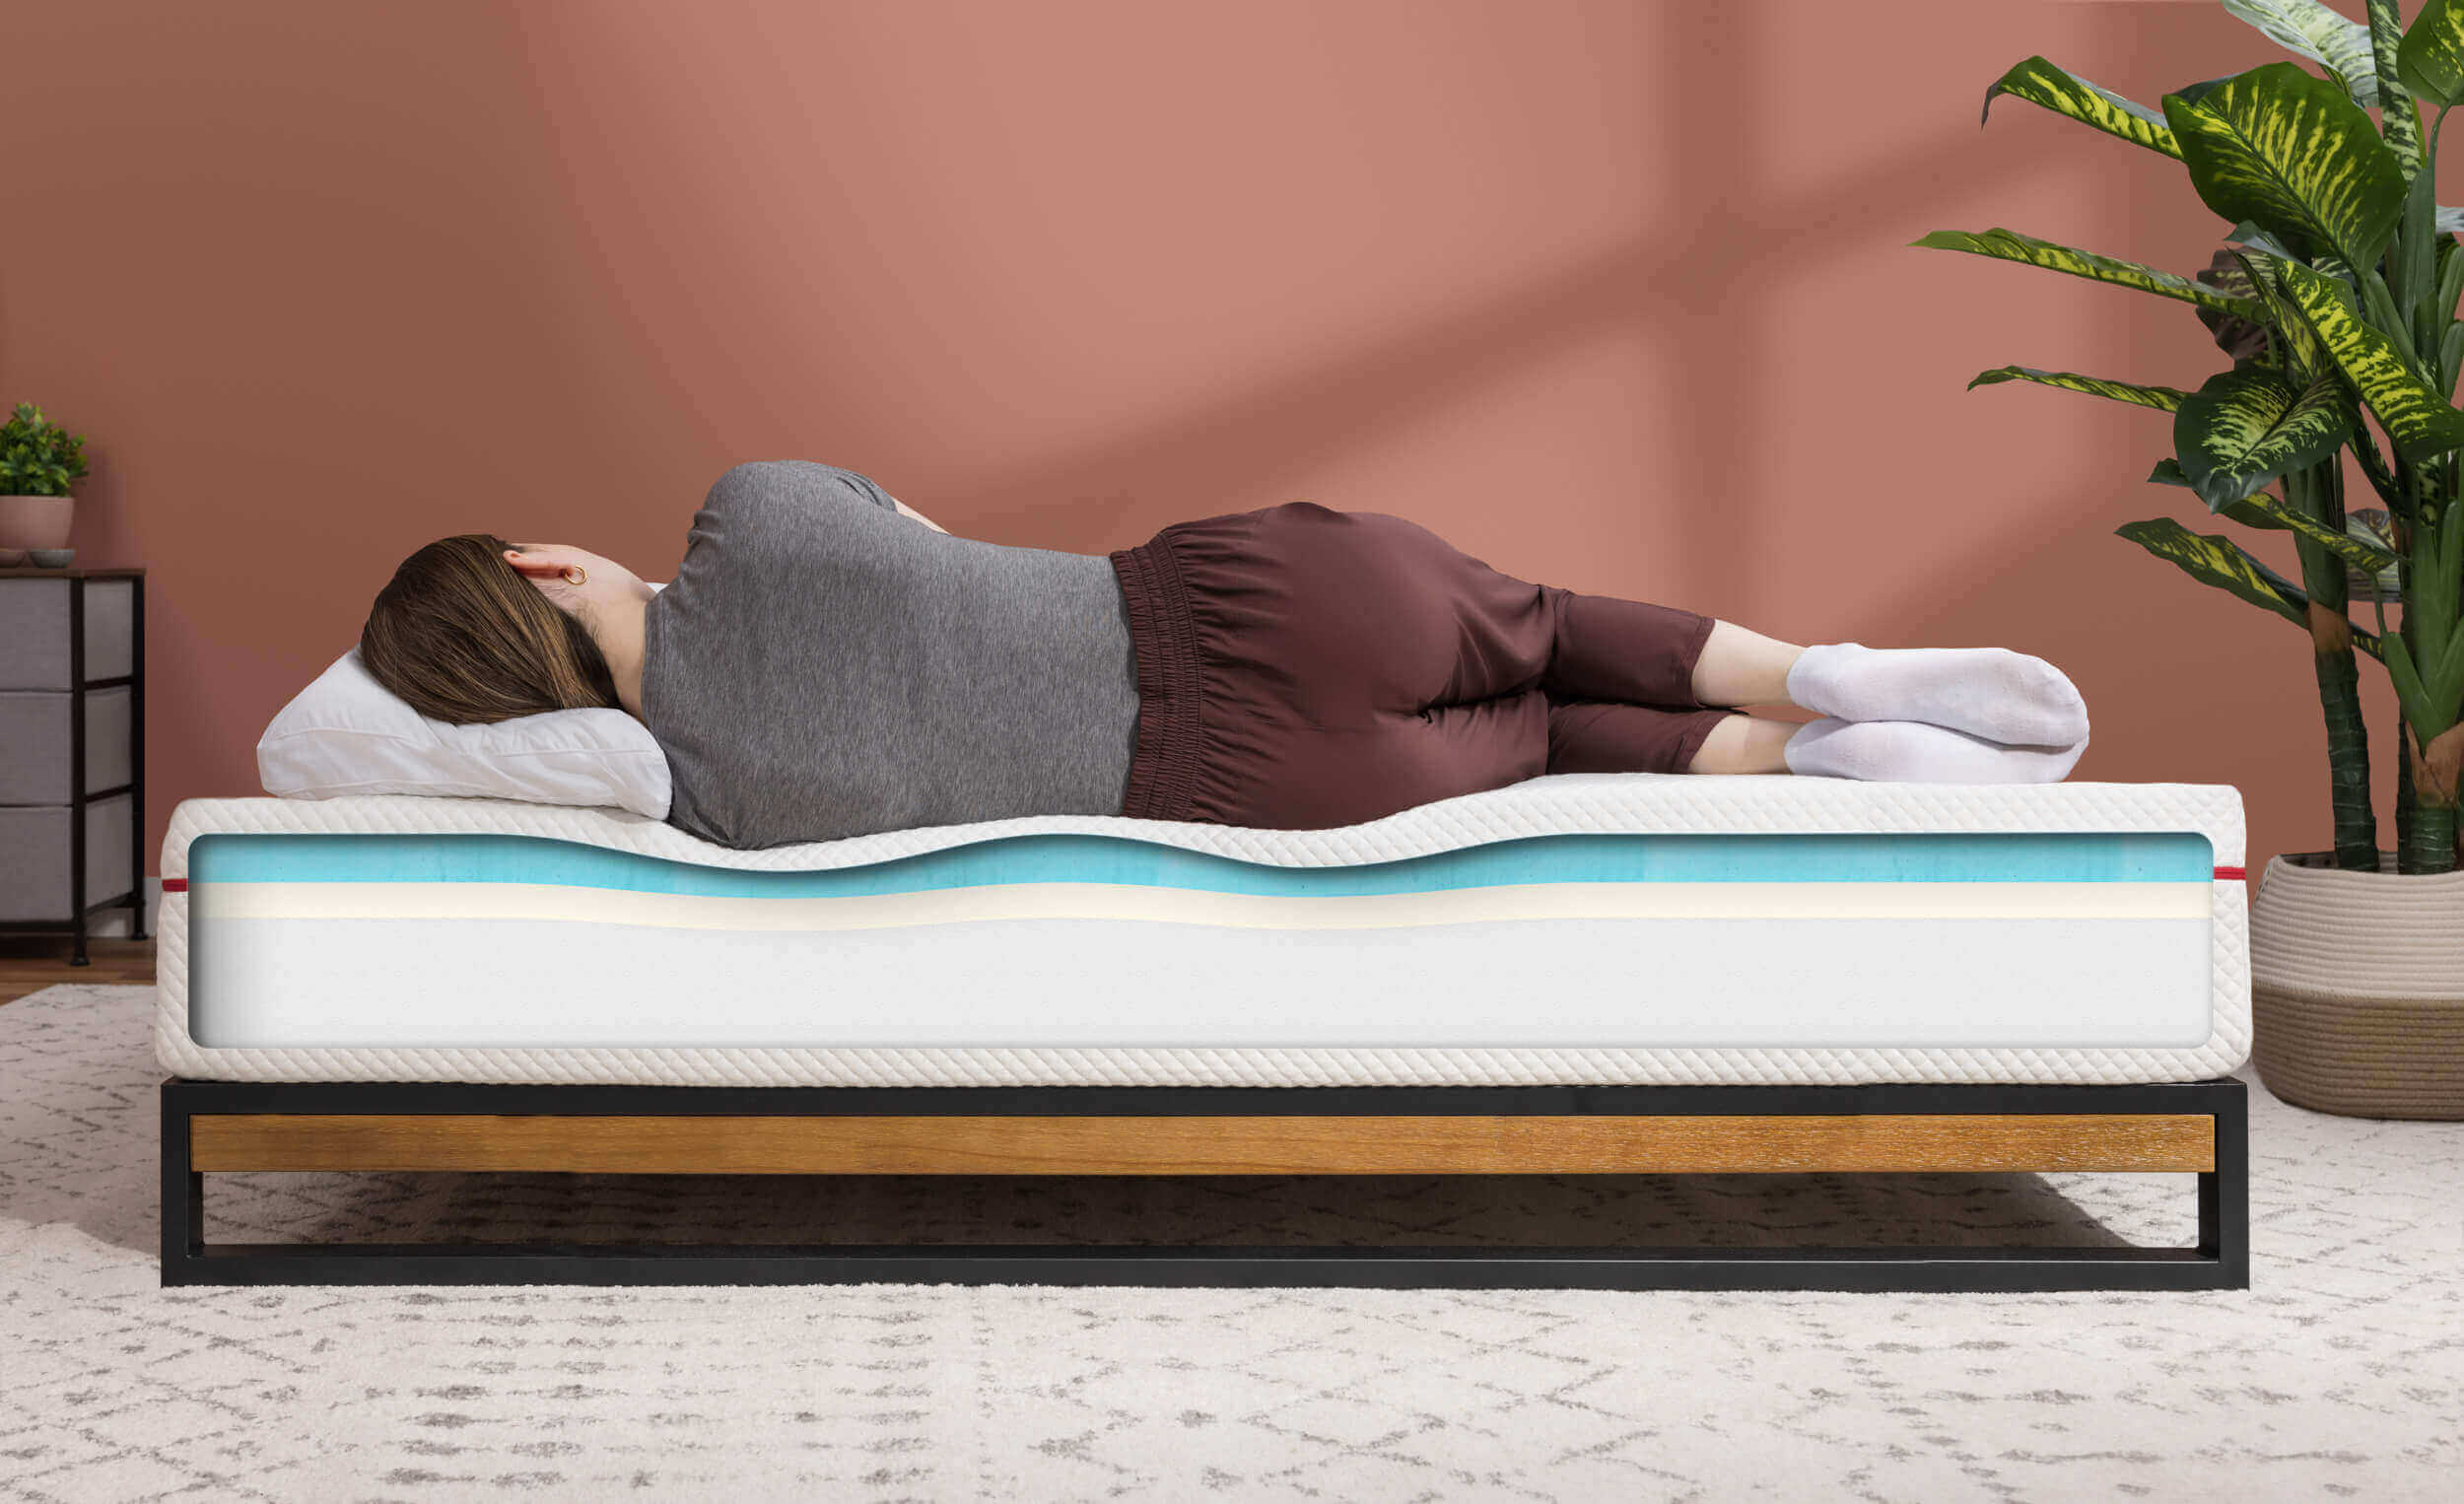 A woman sleeps on a Douglas mattress, which shows a cross section of its layers to display body contouring and how the Douglas mattress provides spinal alignment.